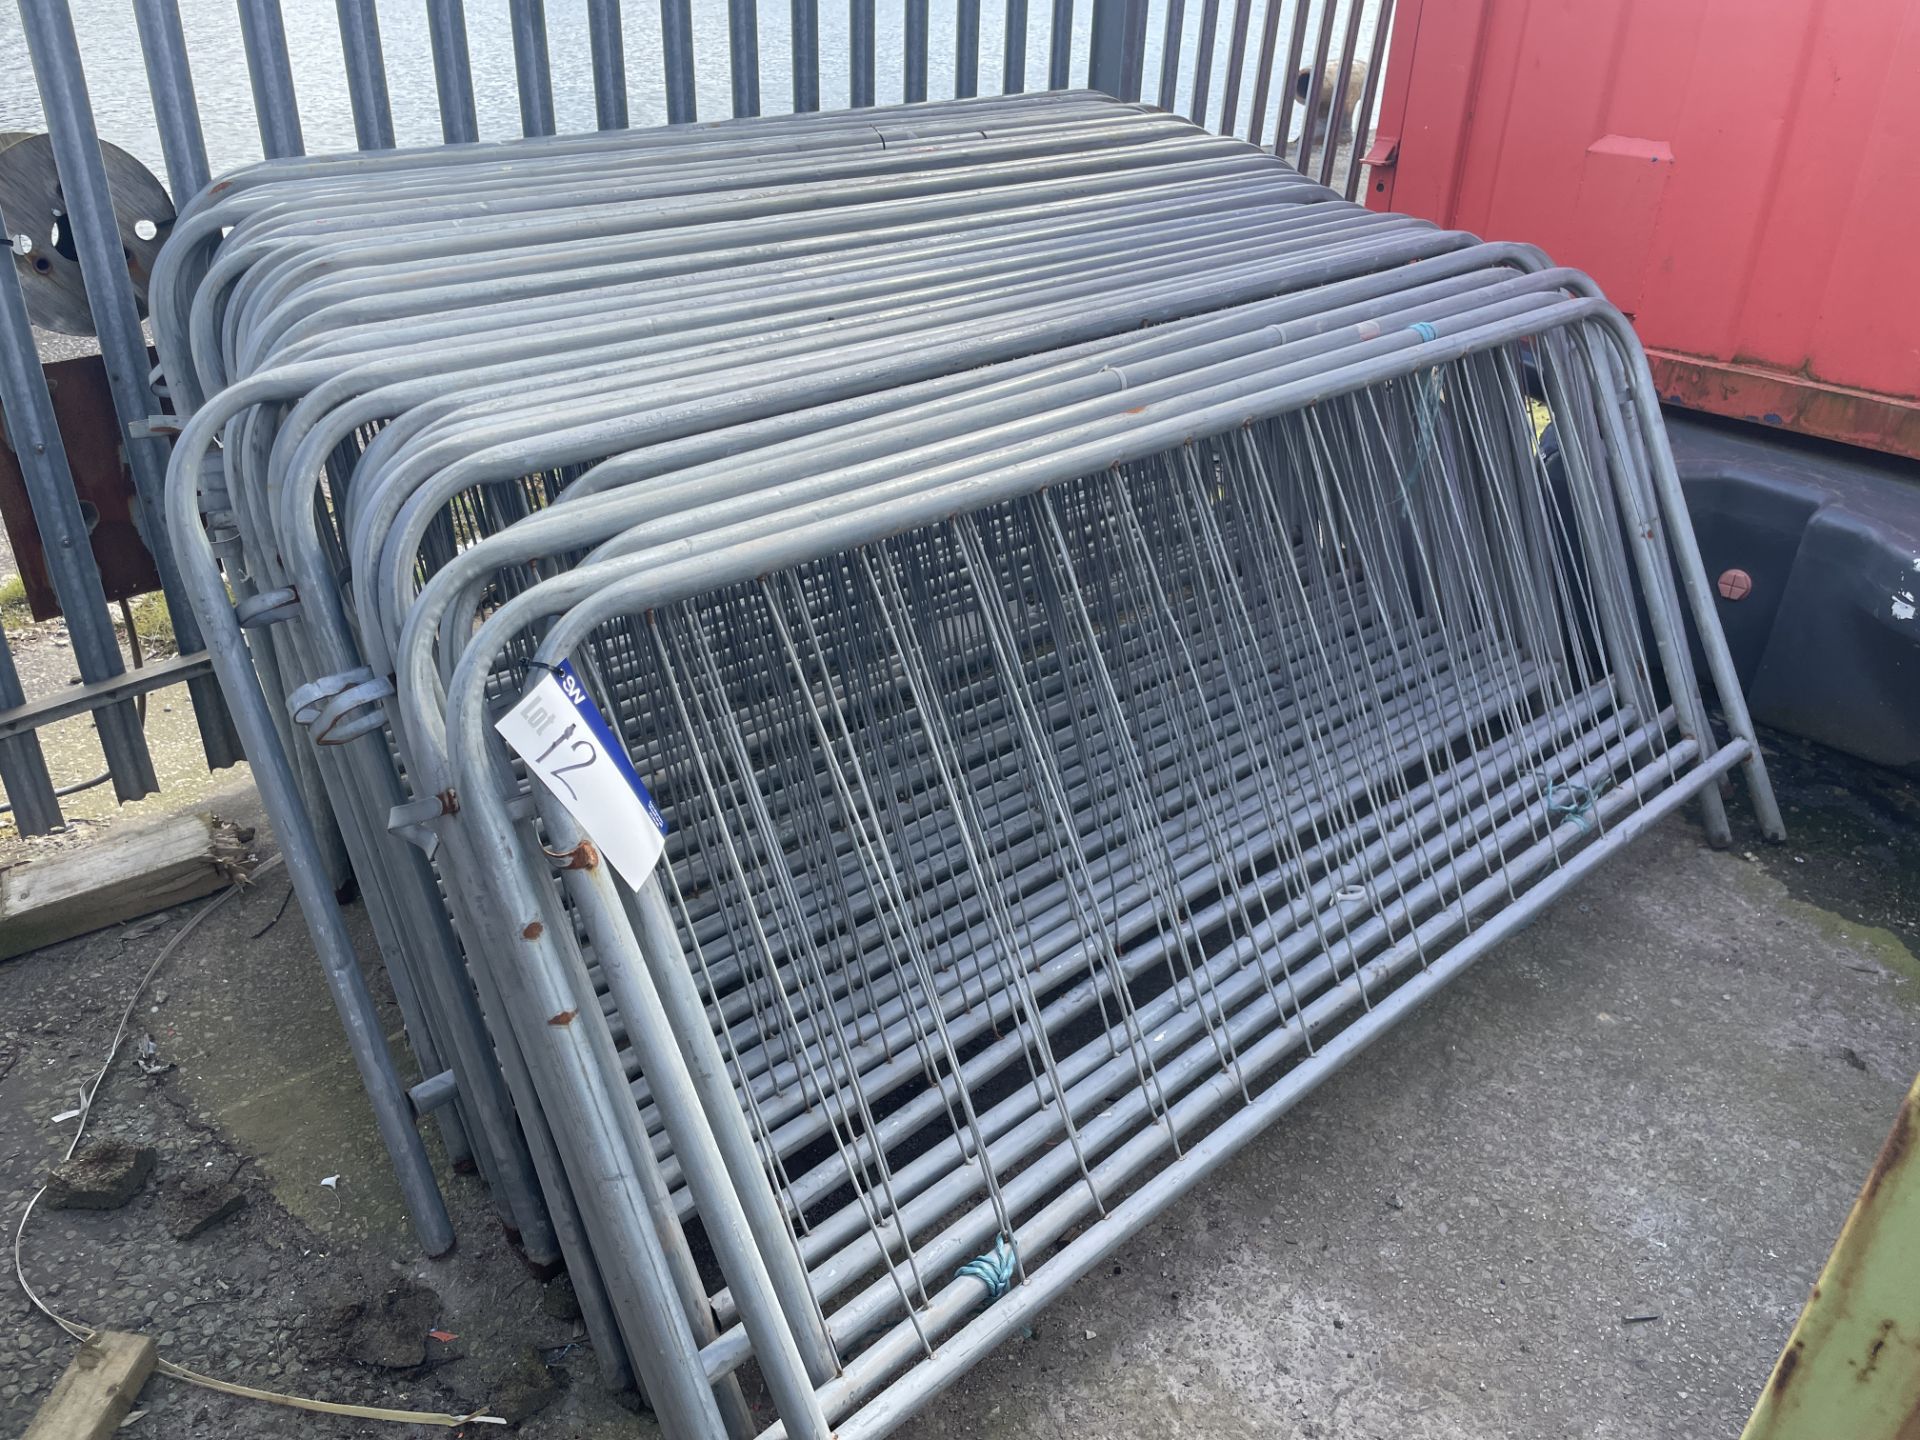 35 Galvanised Steel Barrier Rails, each approx. 2.2m wide Please read the following important